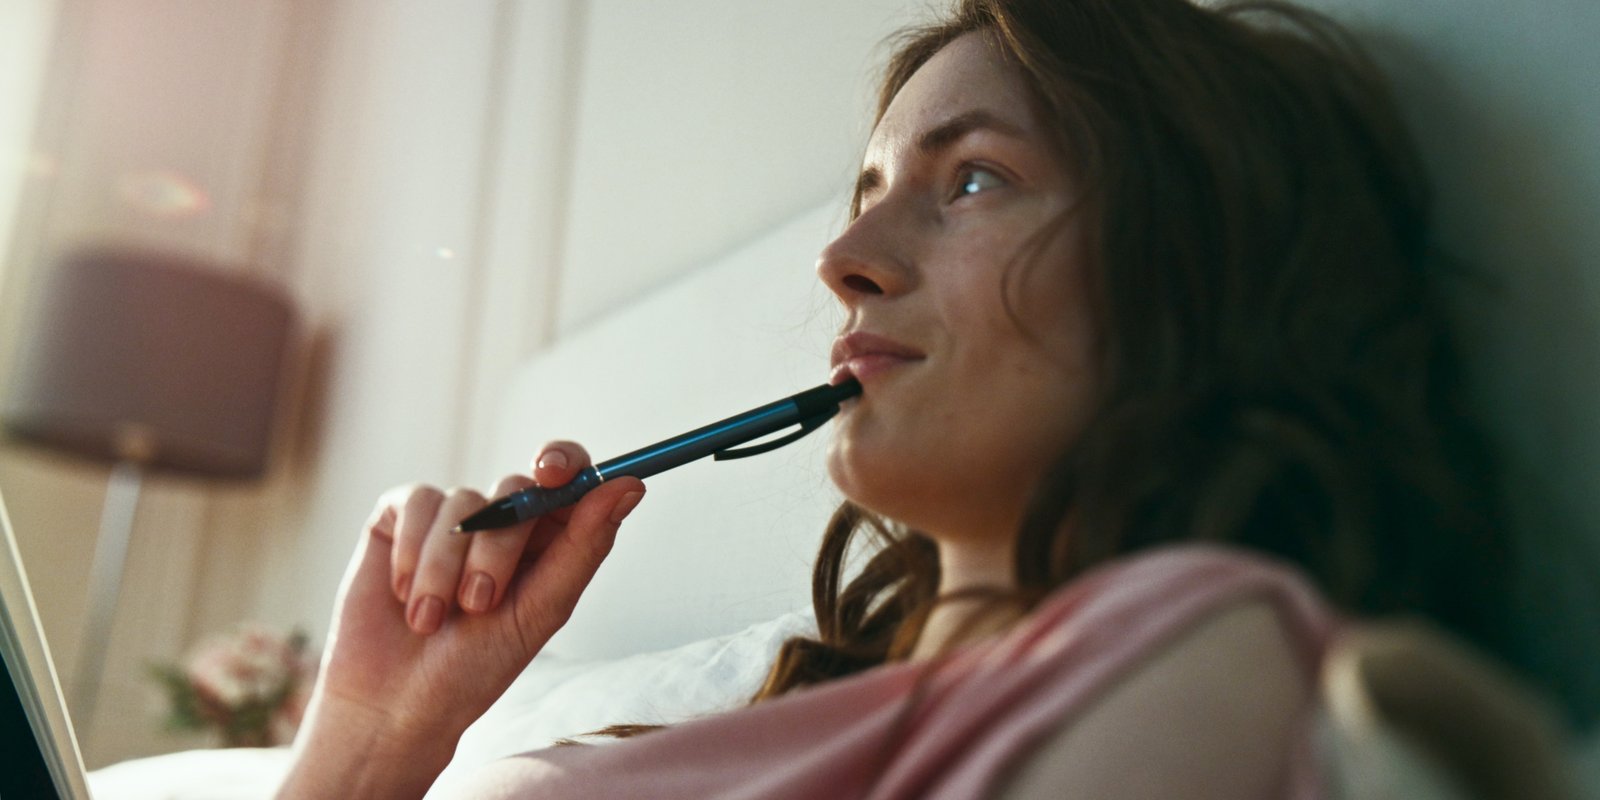 Woman lying on the bed with a pen on her chin looking straight